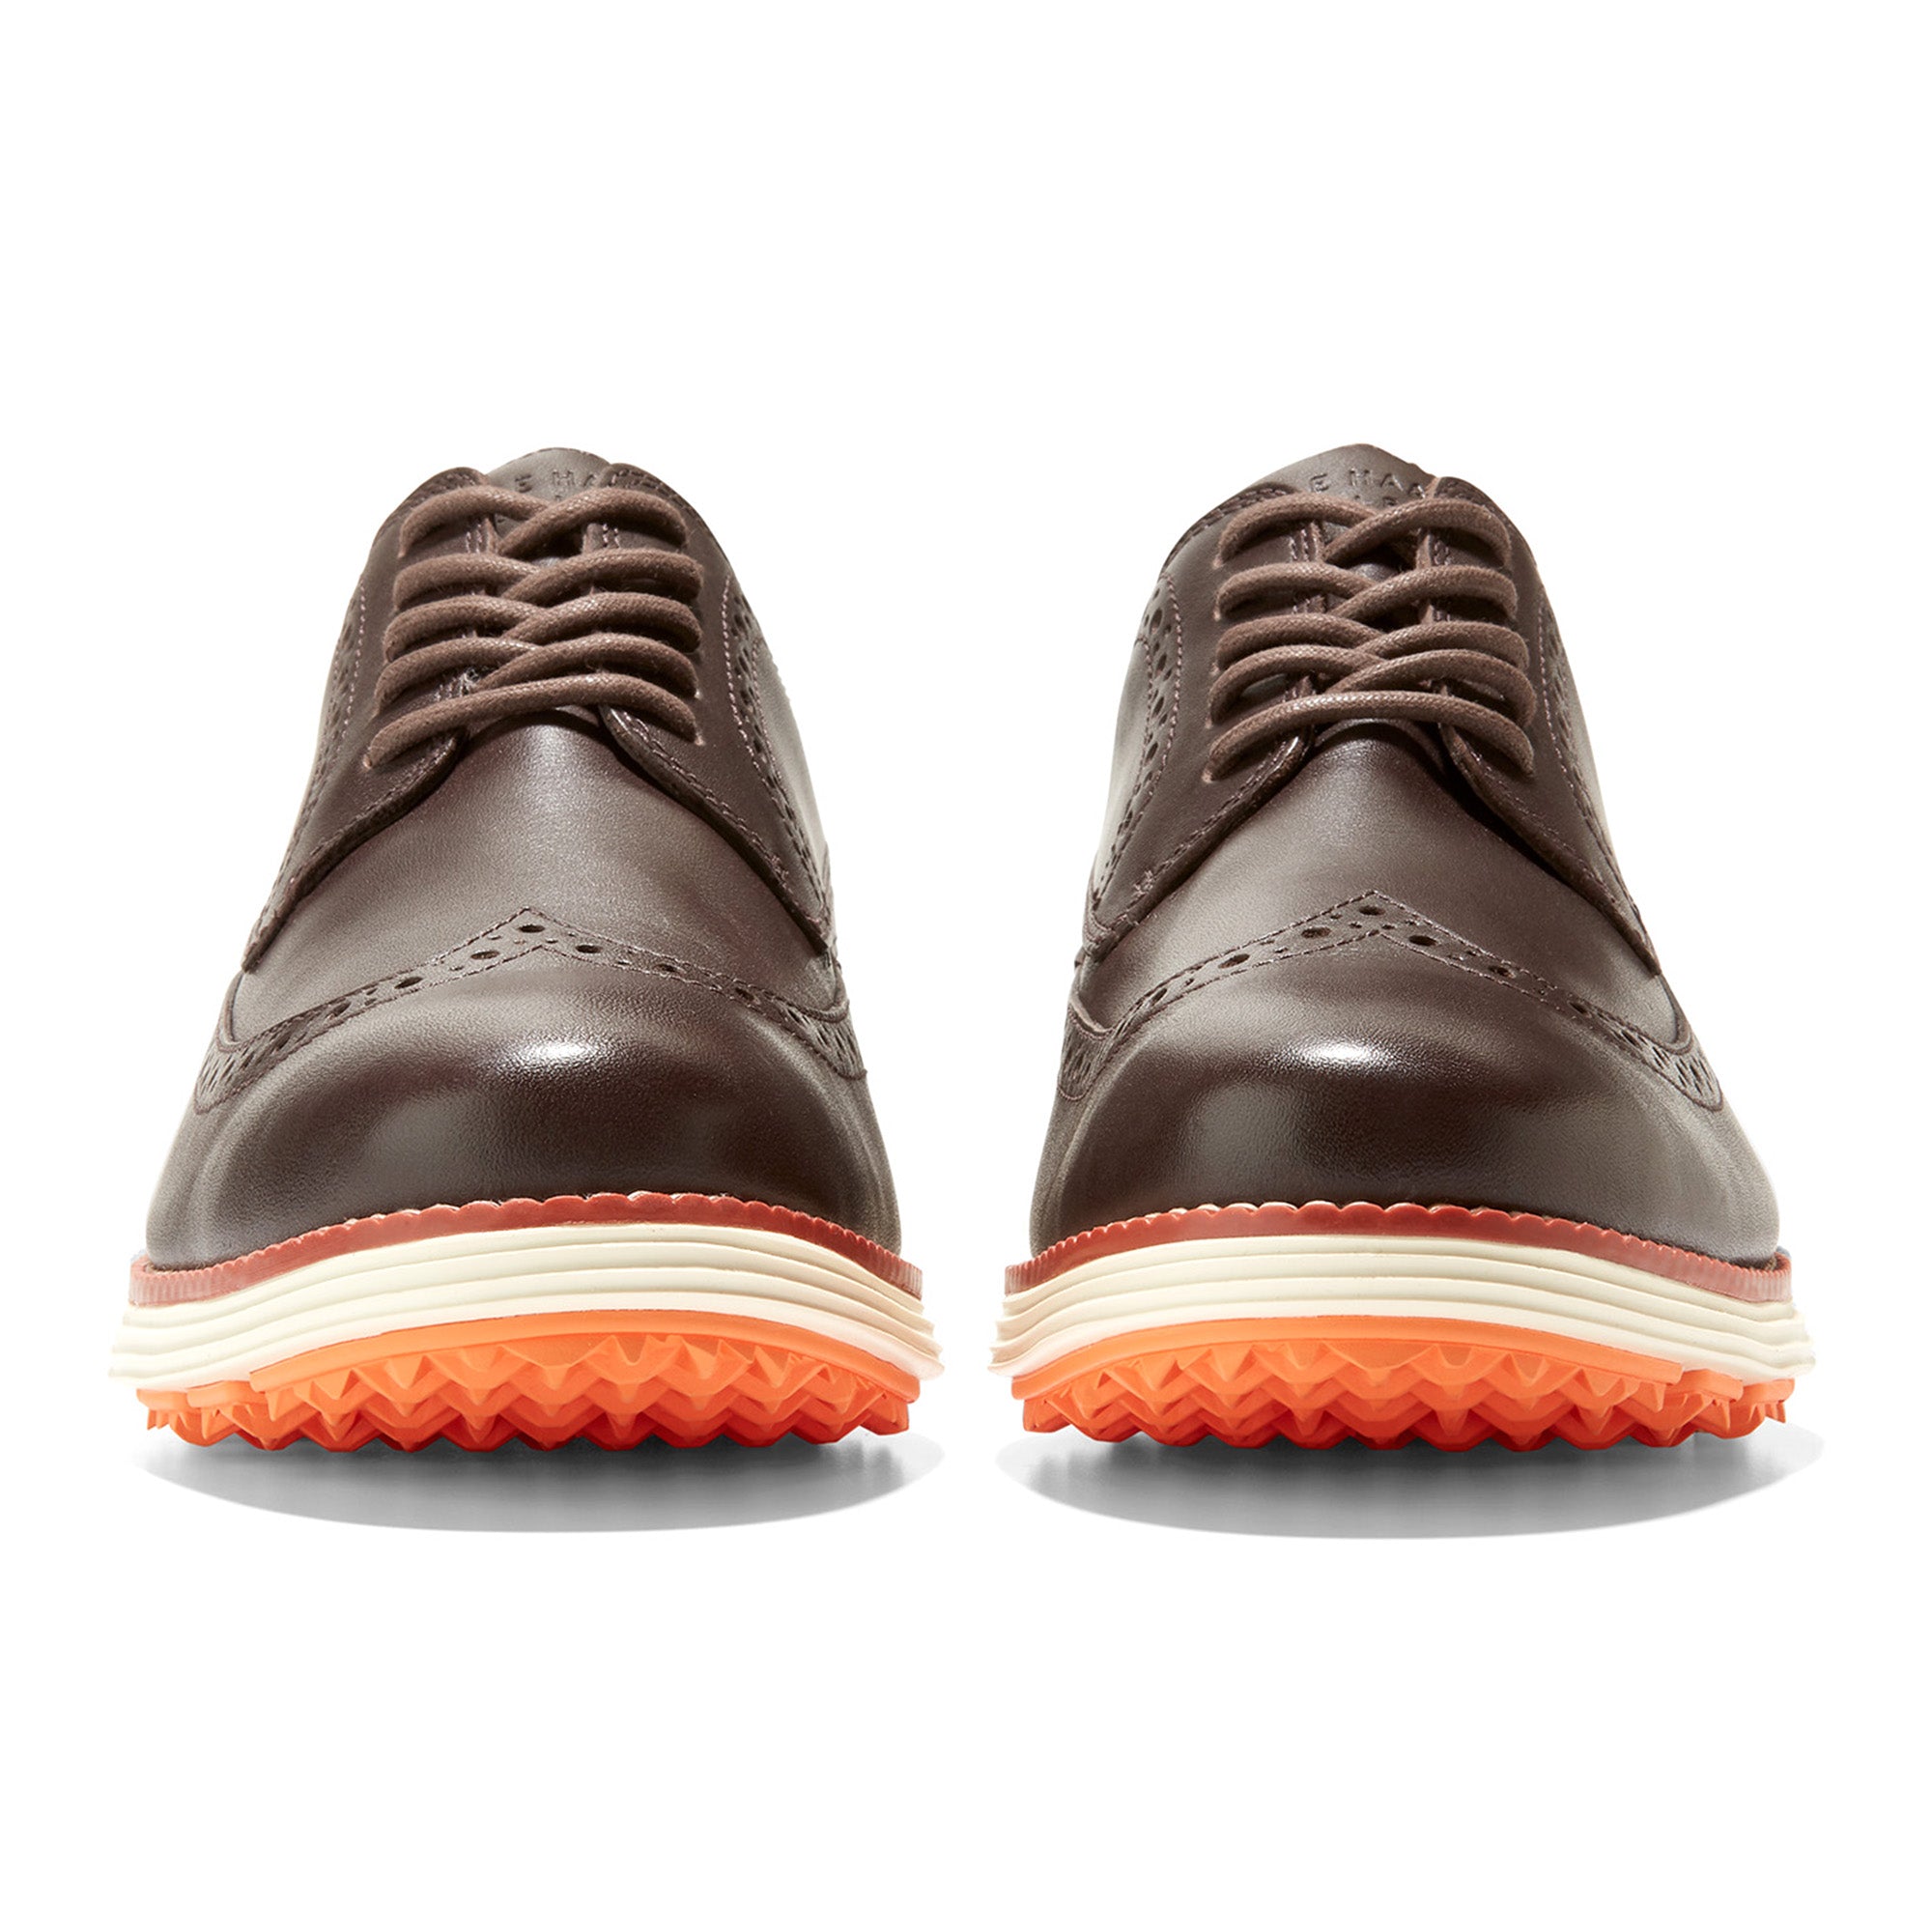 Cole Haan OriginalGrand Wing Ox Golf Shoes